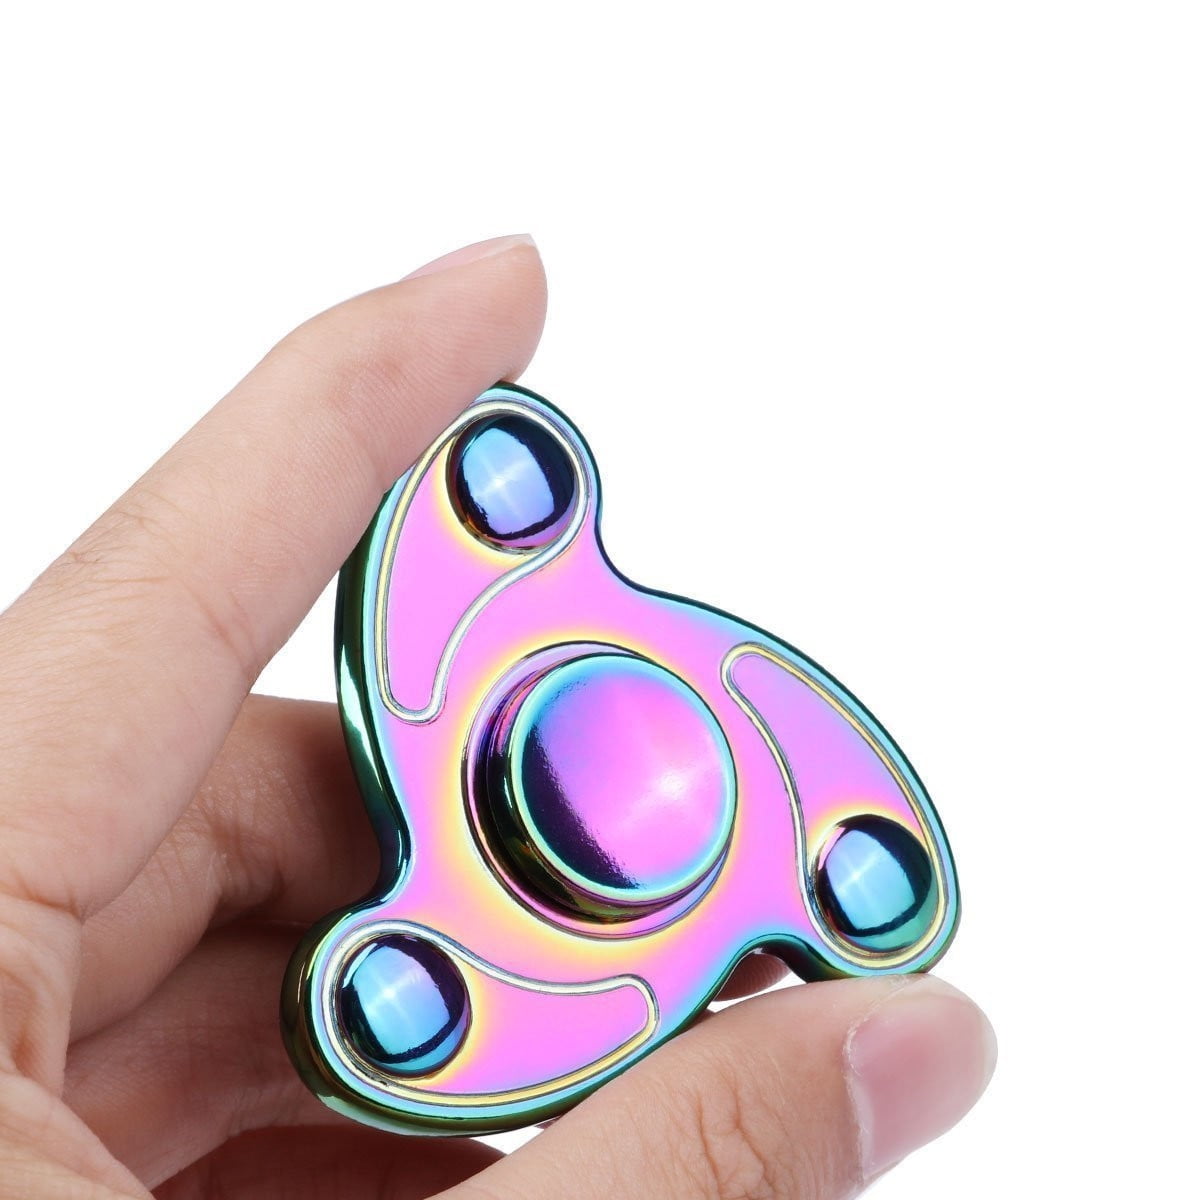 Superhero Fidget Spinners Alloy Sensory Toys Set Finger Hand Spinner Desk Gadget Spinning Top Focus Toy Spiral Twister Fingertip Gyro Stress Relief ADD ADHD EDC Anti Anxiety Gift For Kids Adults